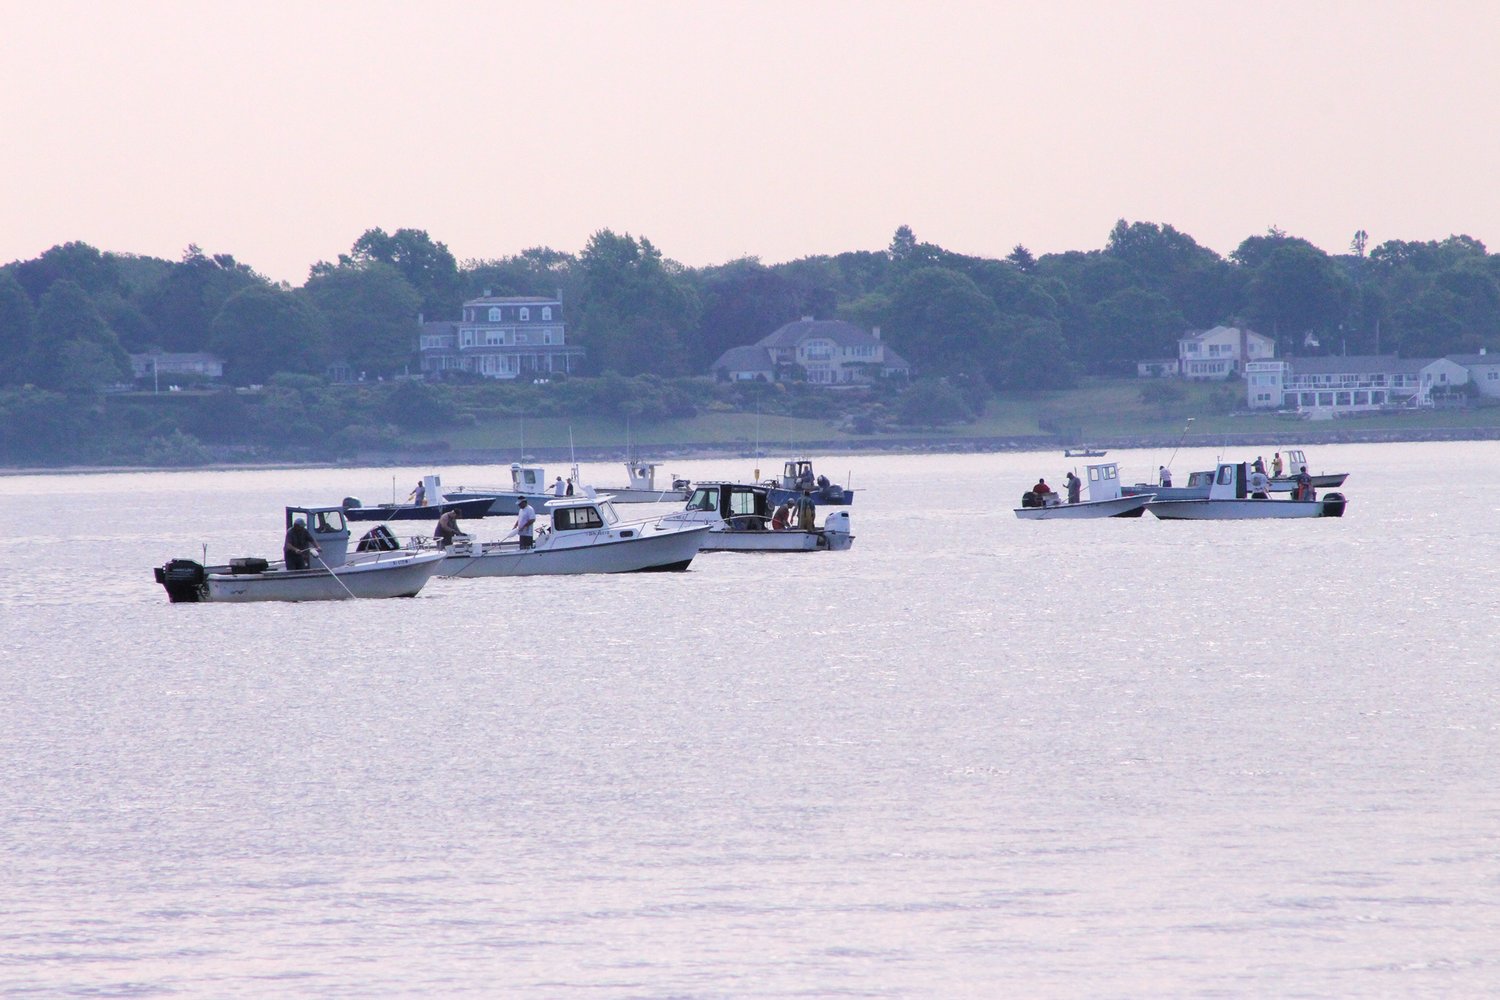 A QUAHOGGERS’ ARMADA: More than 100 quahoggers are turning out to fish the highly productive Area E of the Providence River north of Conimicut Point. The area opened for a first time in 75 years last summer when as many as 193 boats were recorded on one day.  So far, shellfishermen have focused on Conimicut, seen here, off Gaspee and Bullock’s  Point to the east.